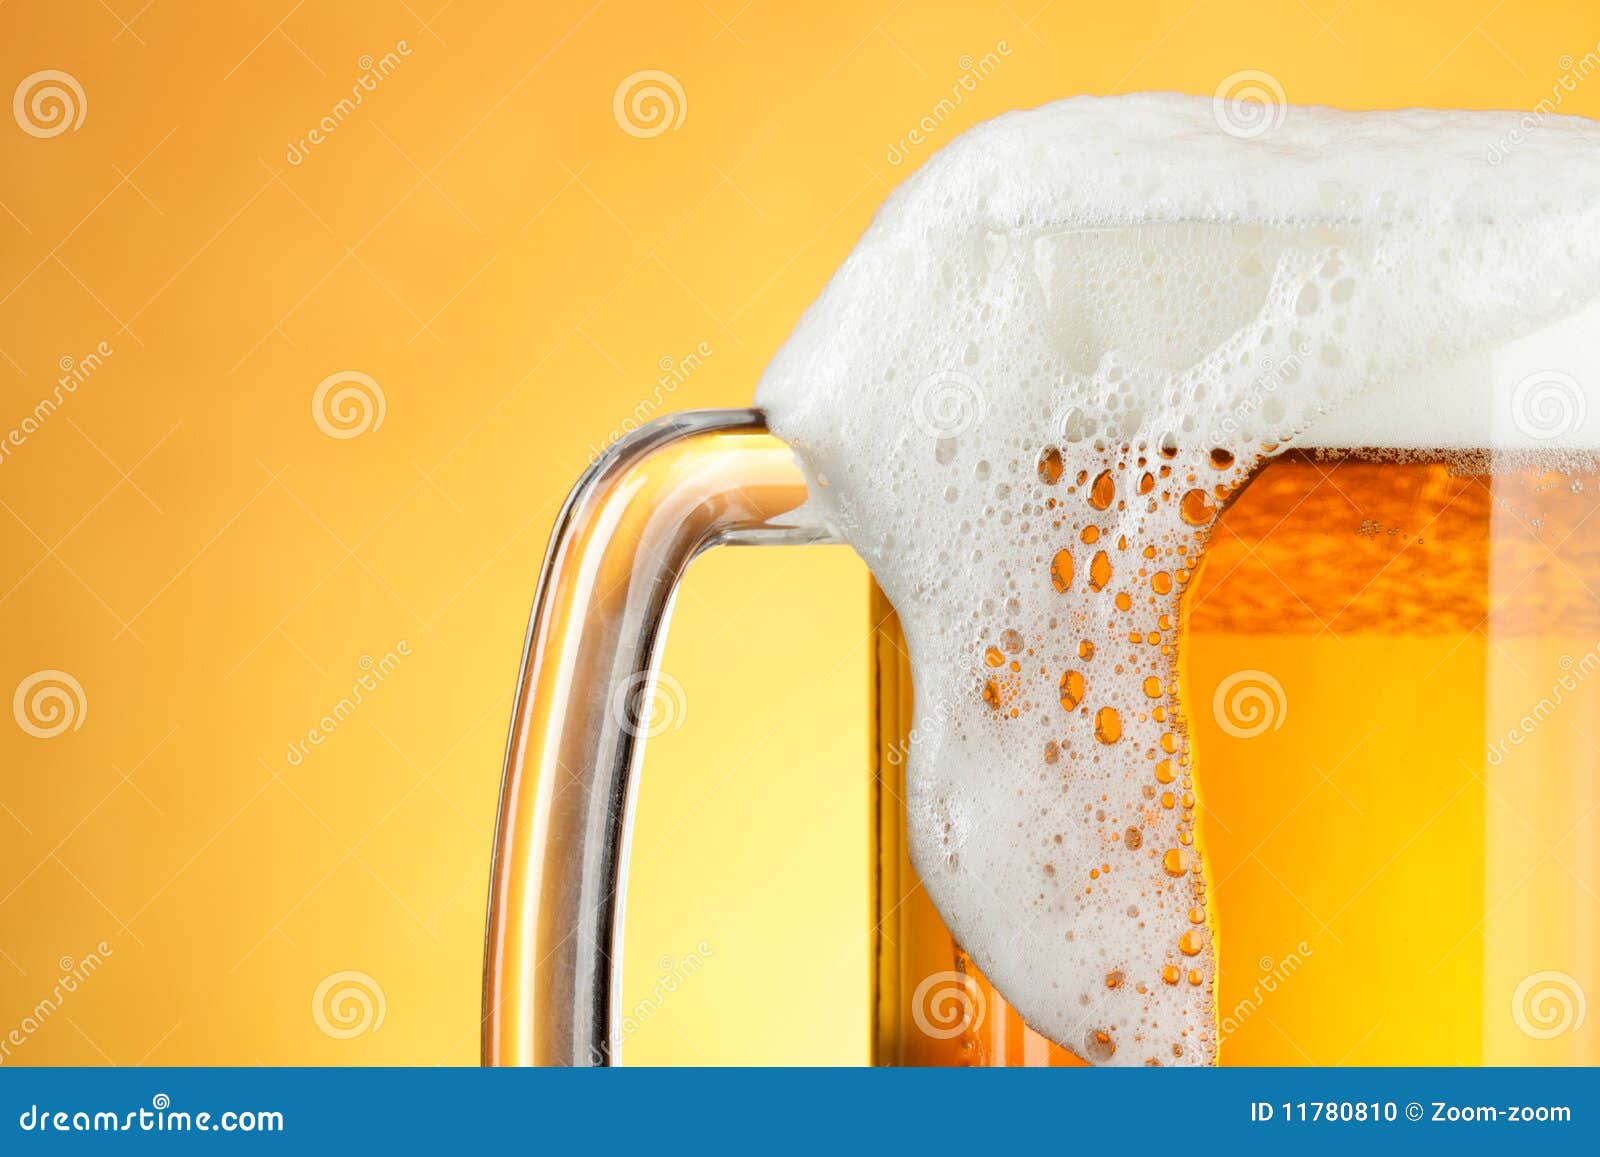 beer mug with froth